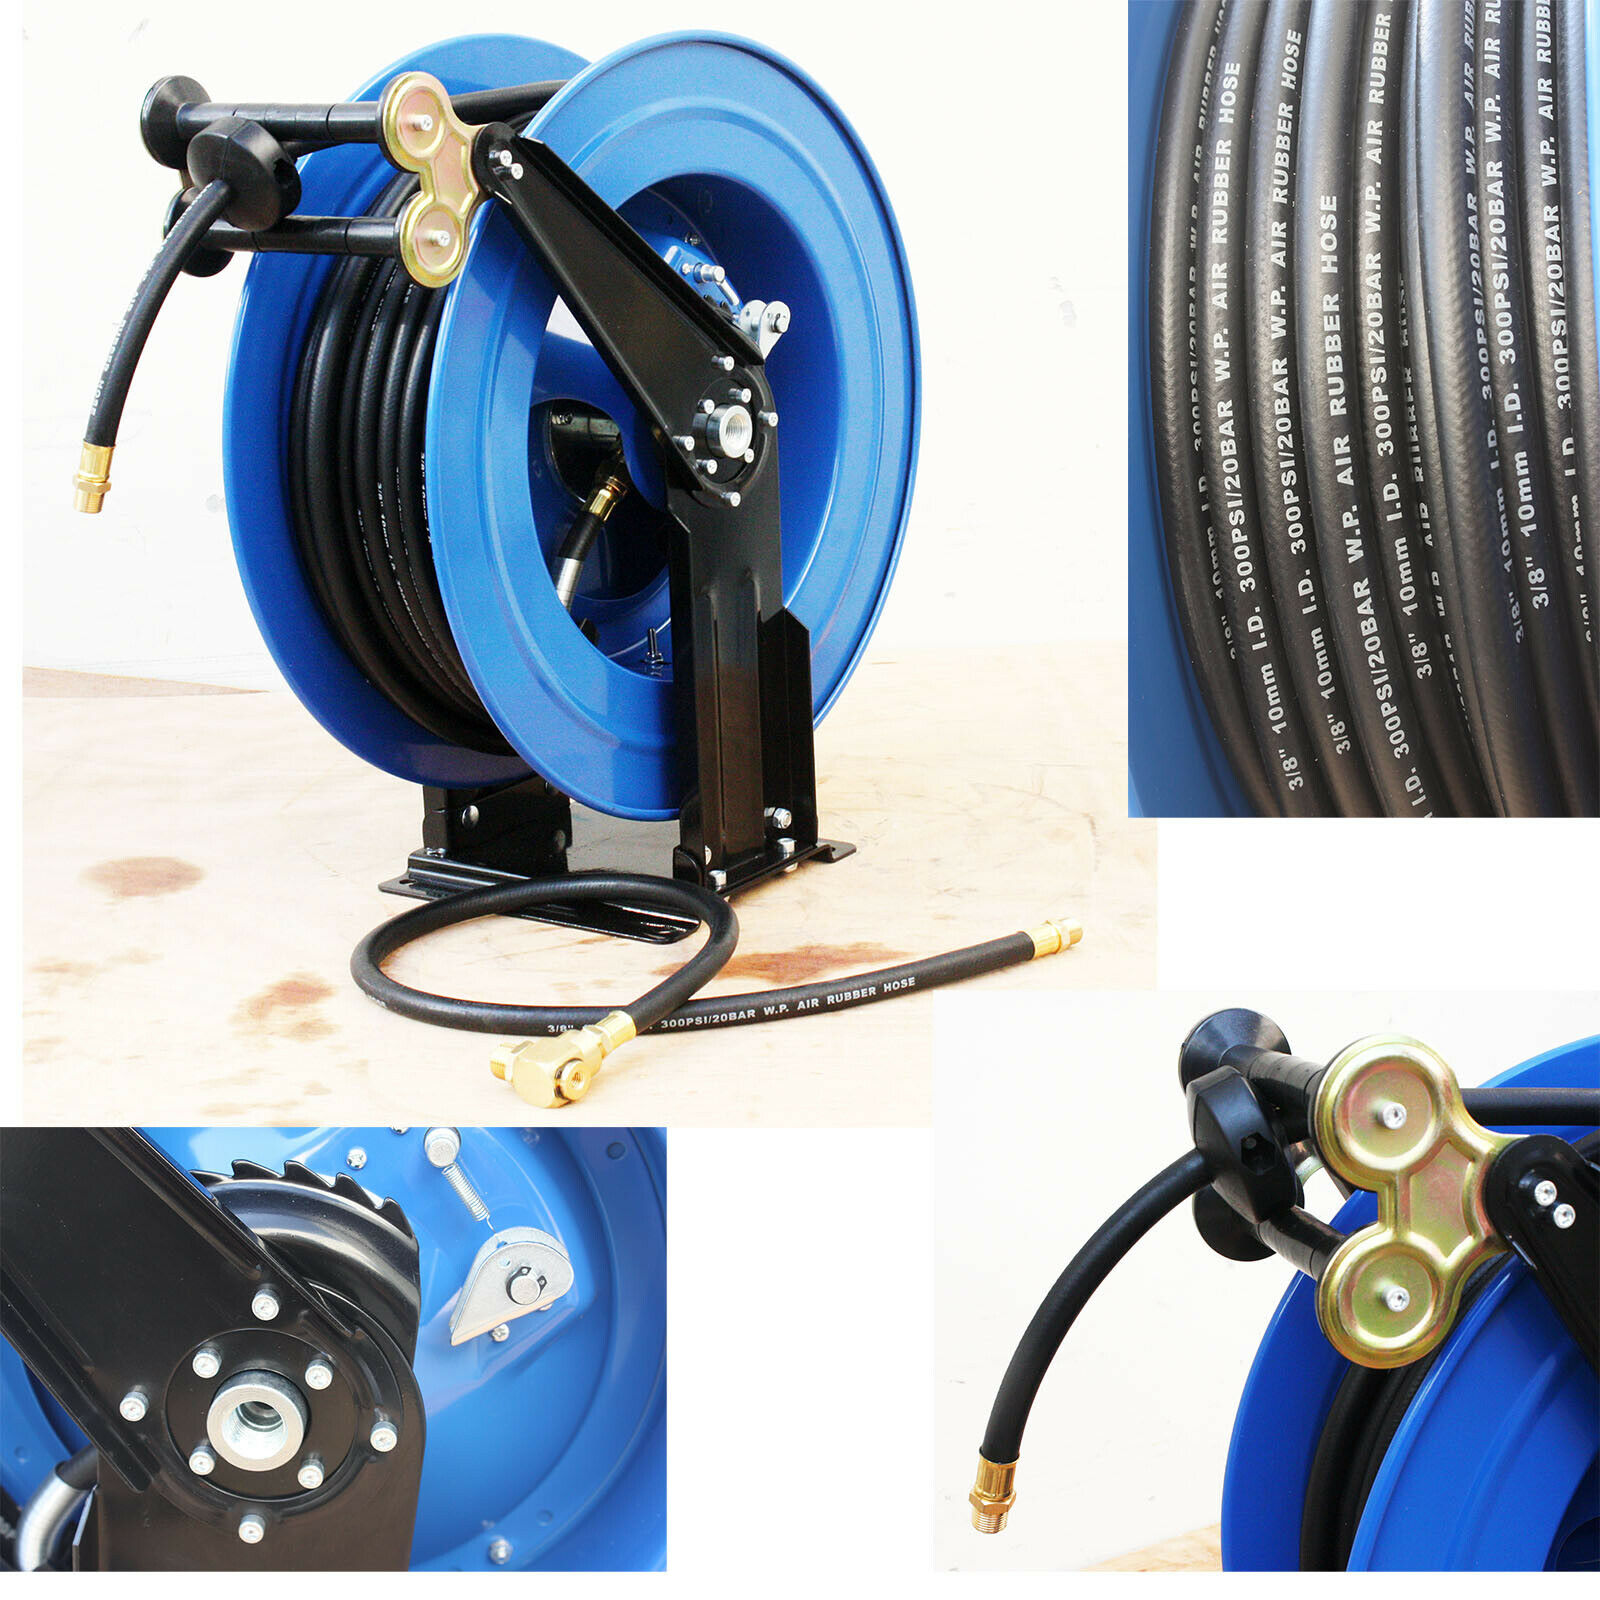 https://econosuperstore.com/wp-content/uploads/imported/3/Auto-Retractable-100-Air-Hose-Reel-100ft-Rubber-Hose-300psi-Ceiling-Wall-Mount-353578067763-3.jpg